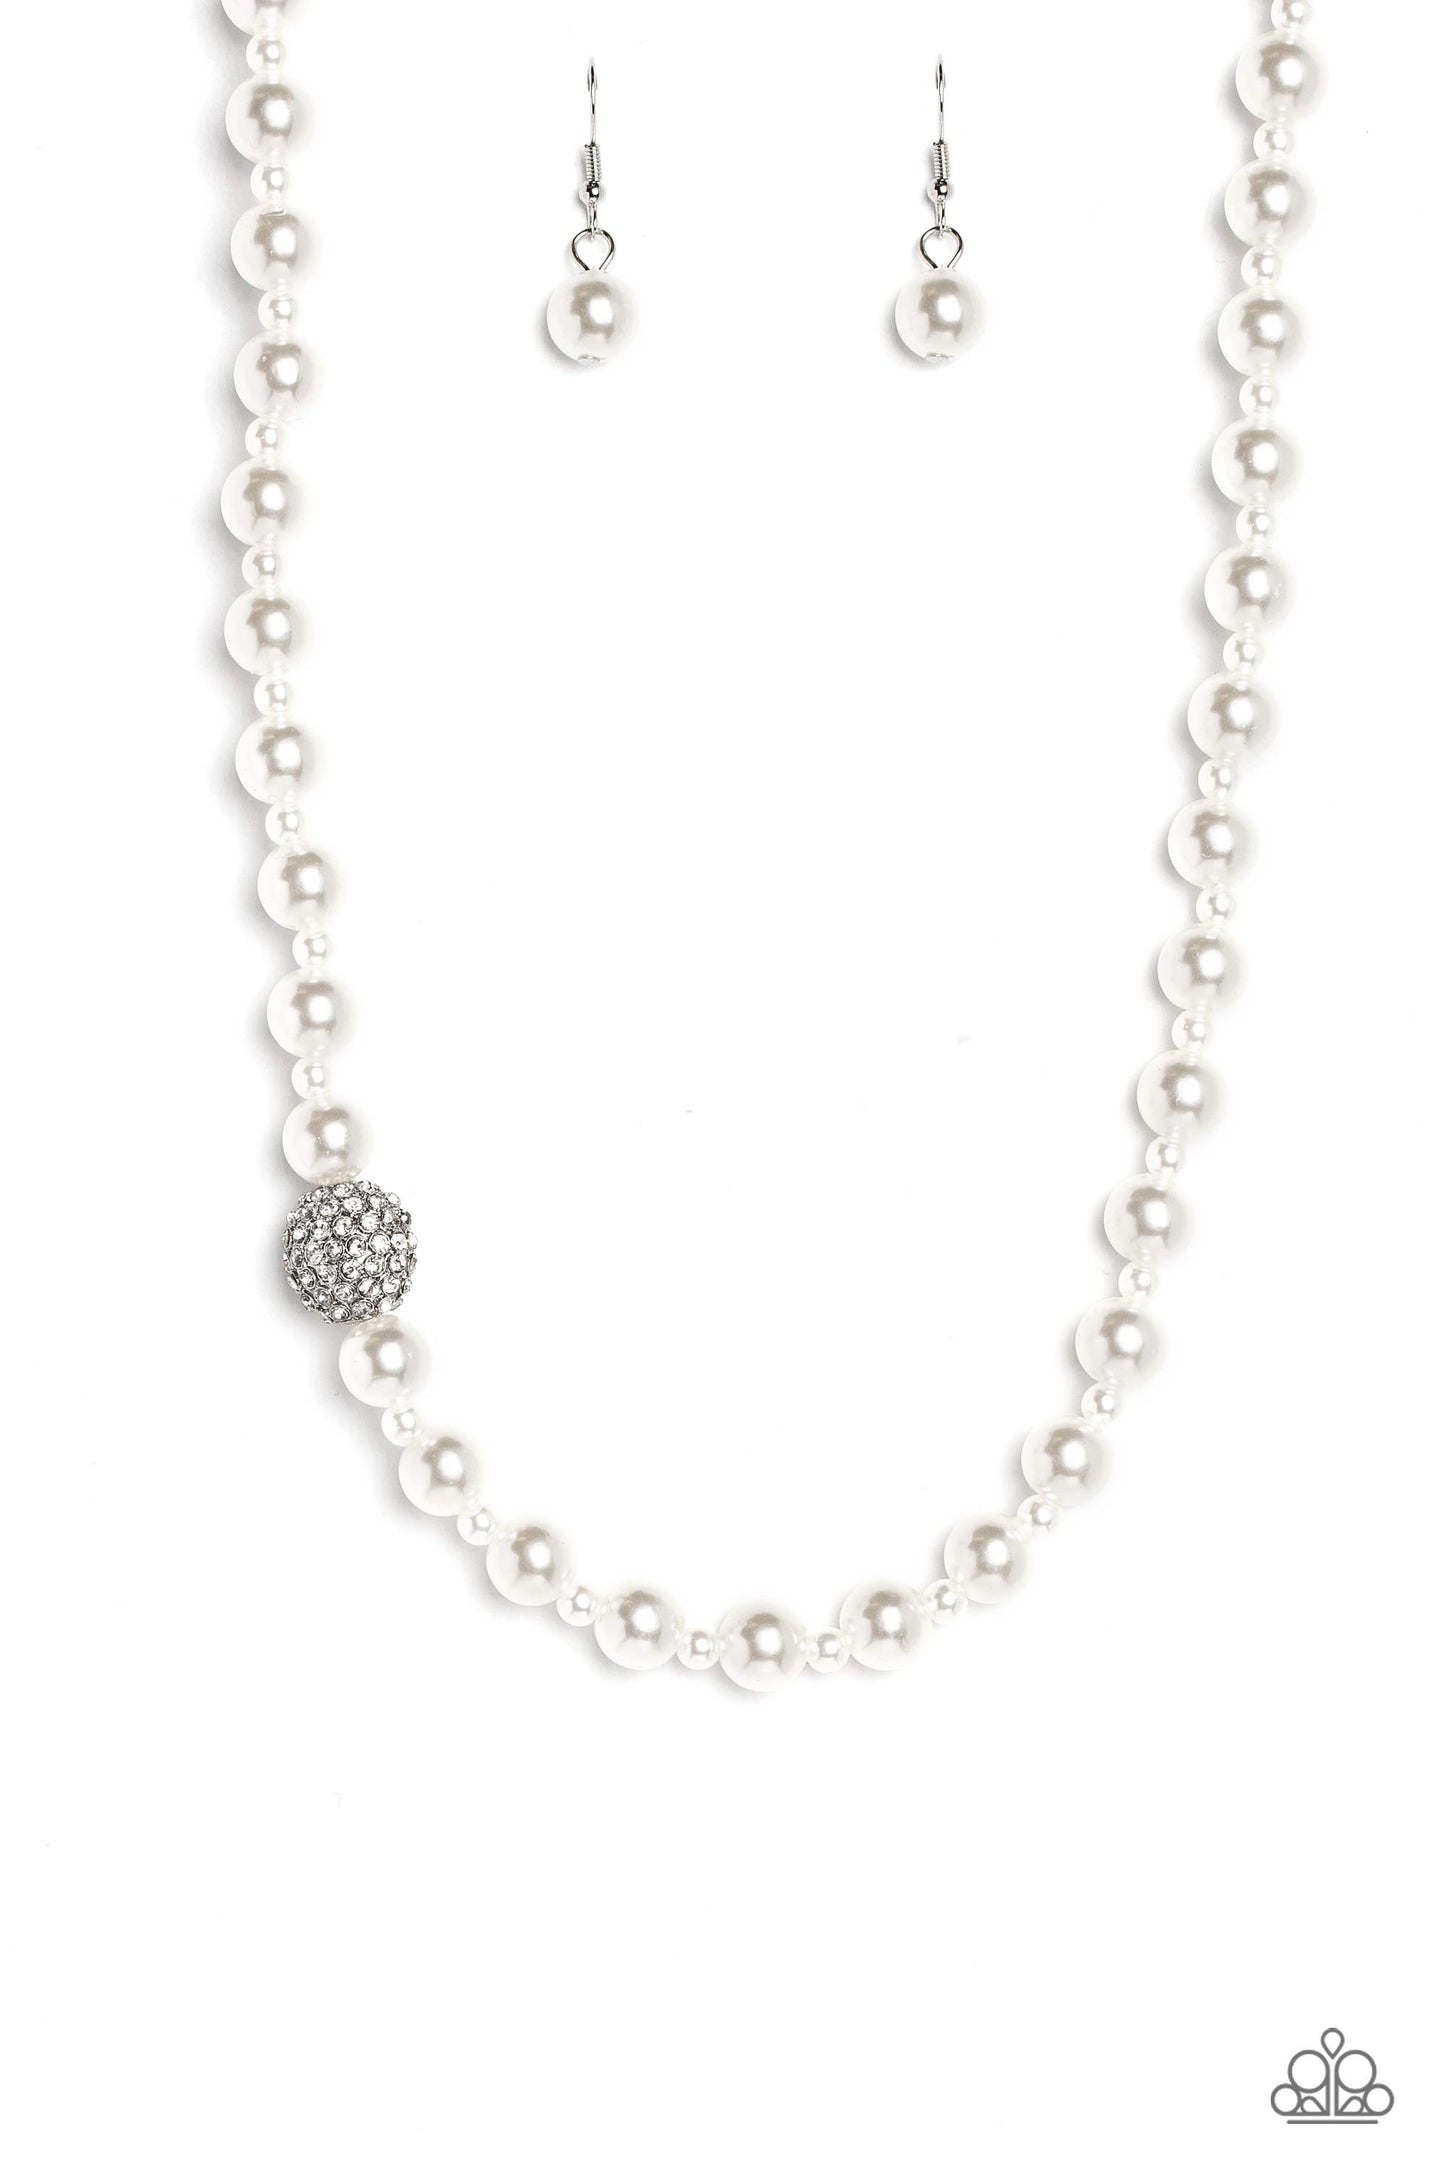 Paparazzi Accessories - Countess Chic - White Pearl Necklace strung along the entirety of an invisible wire, classic white pearls in varying sizes coalesce down the neckline for a refined finish. Adding to the elegant design, a sparkly white rhinestone-encrusted silver ornament shimmers amongst the sea of pearls. Features an adjustable clasp closure.  Sold as one individual necklace. Includes one pair of matching earrings.